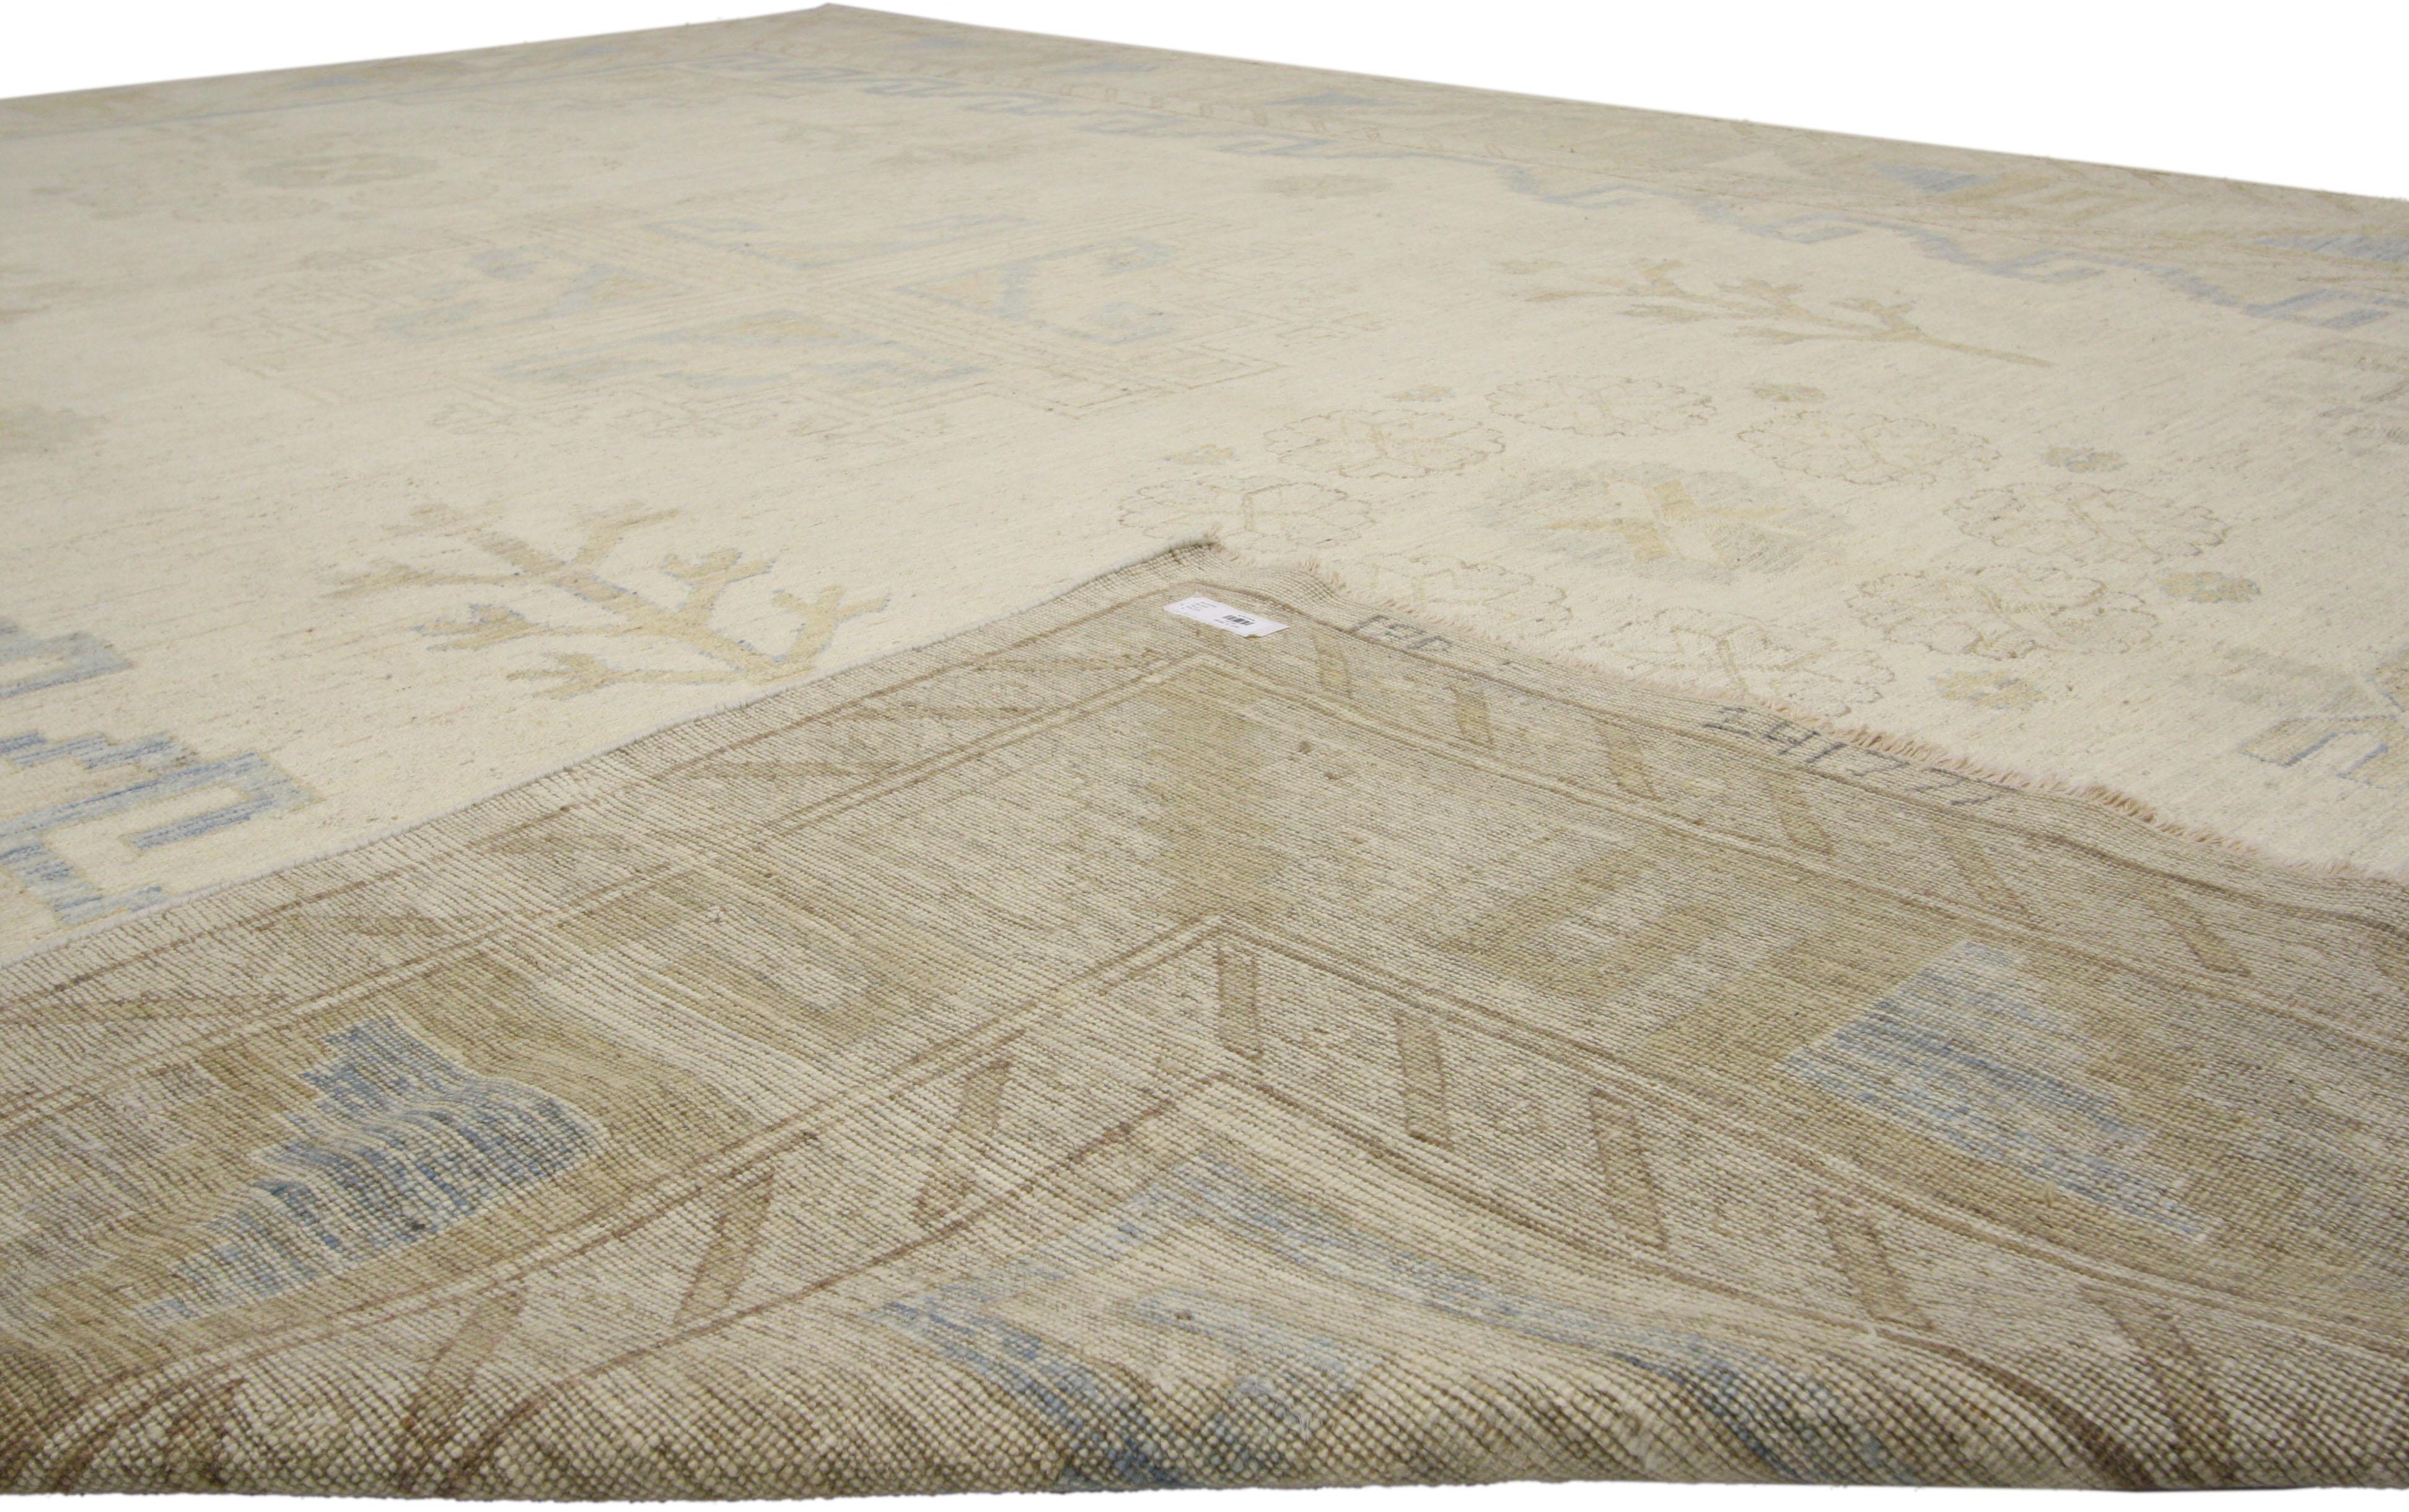 Hand-Knotted New Transitional Area Rug with Khotan Design in Warm, Neutral Colors